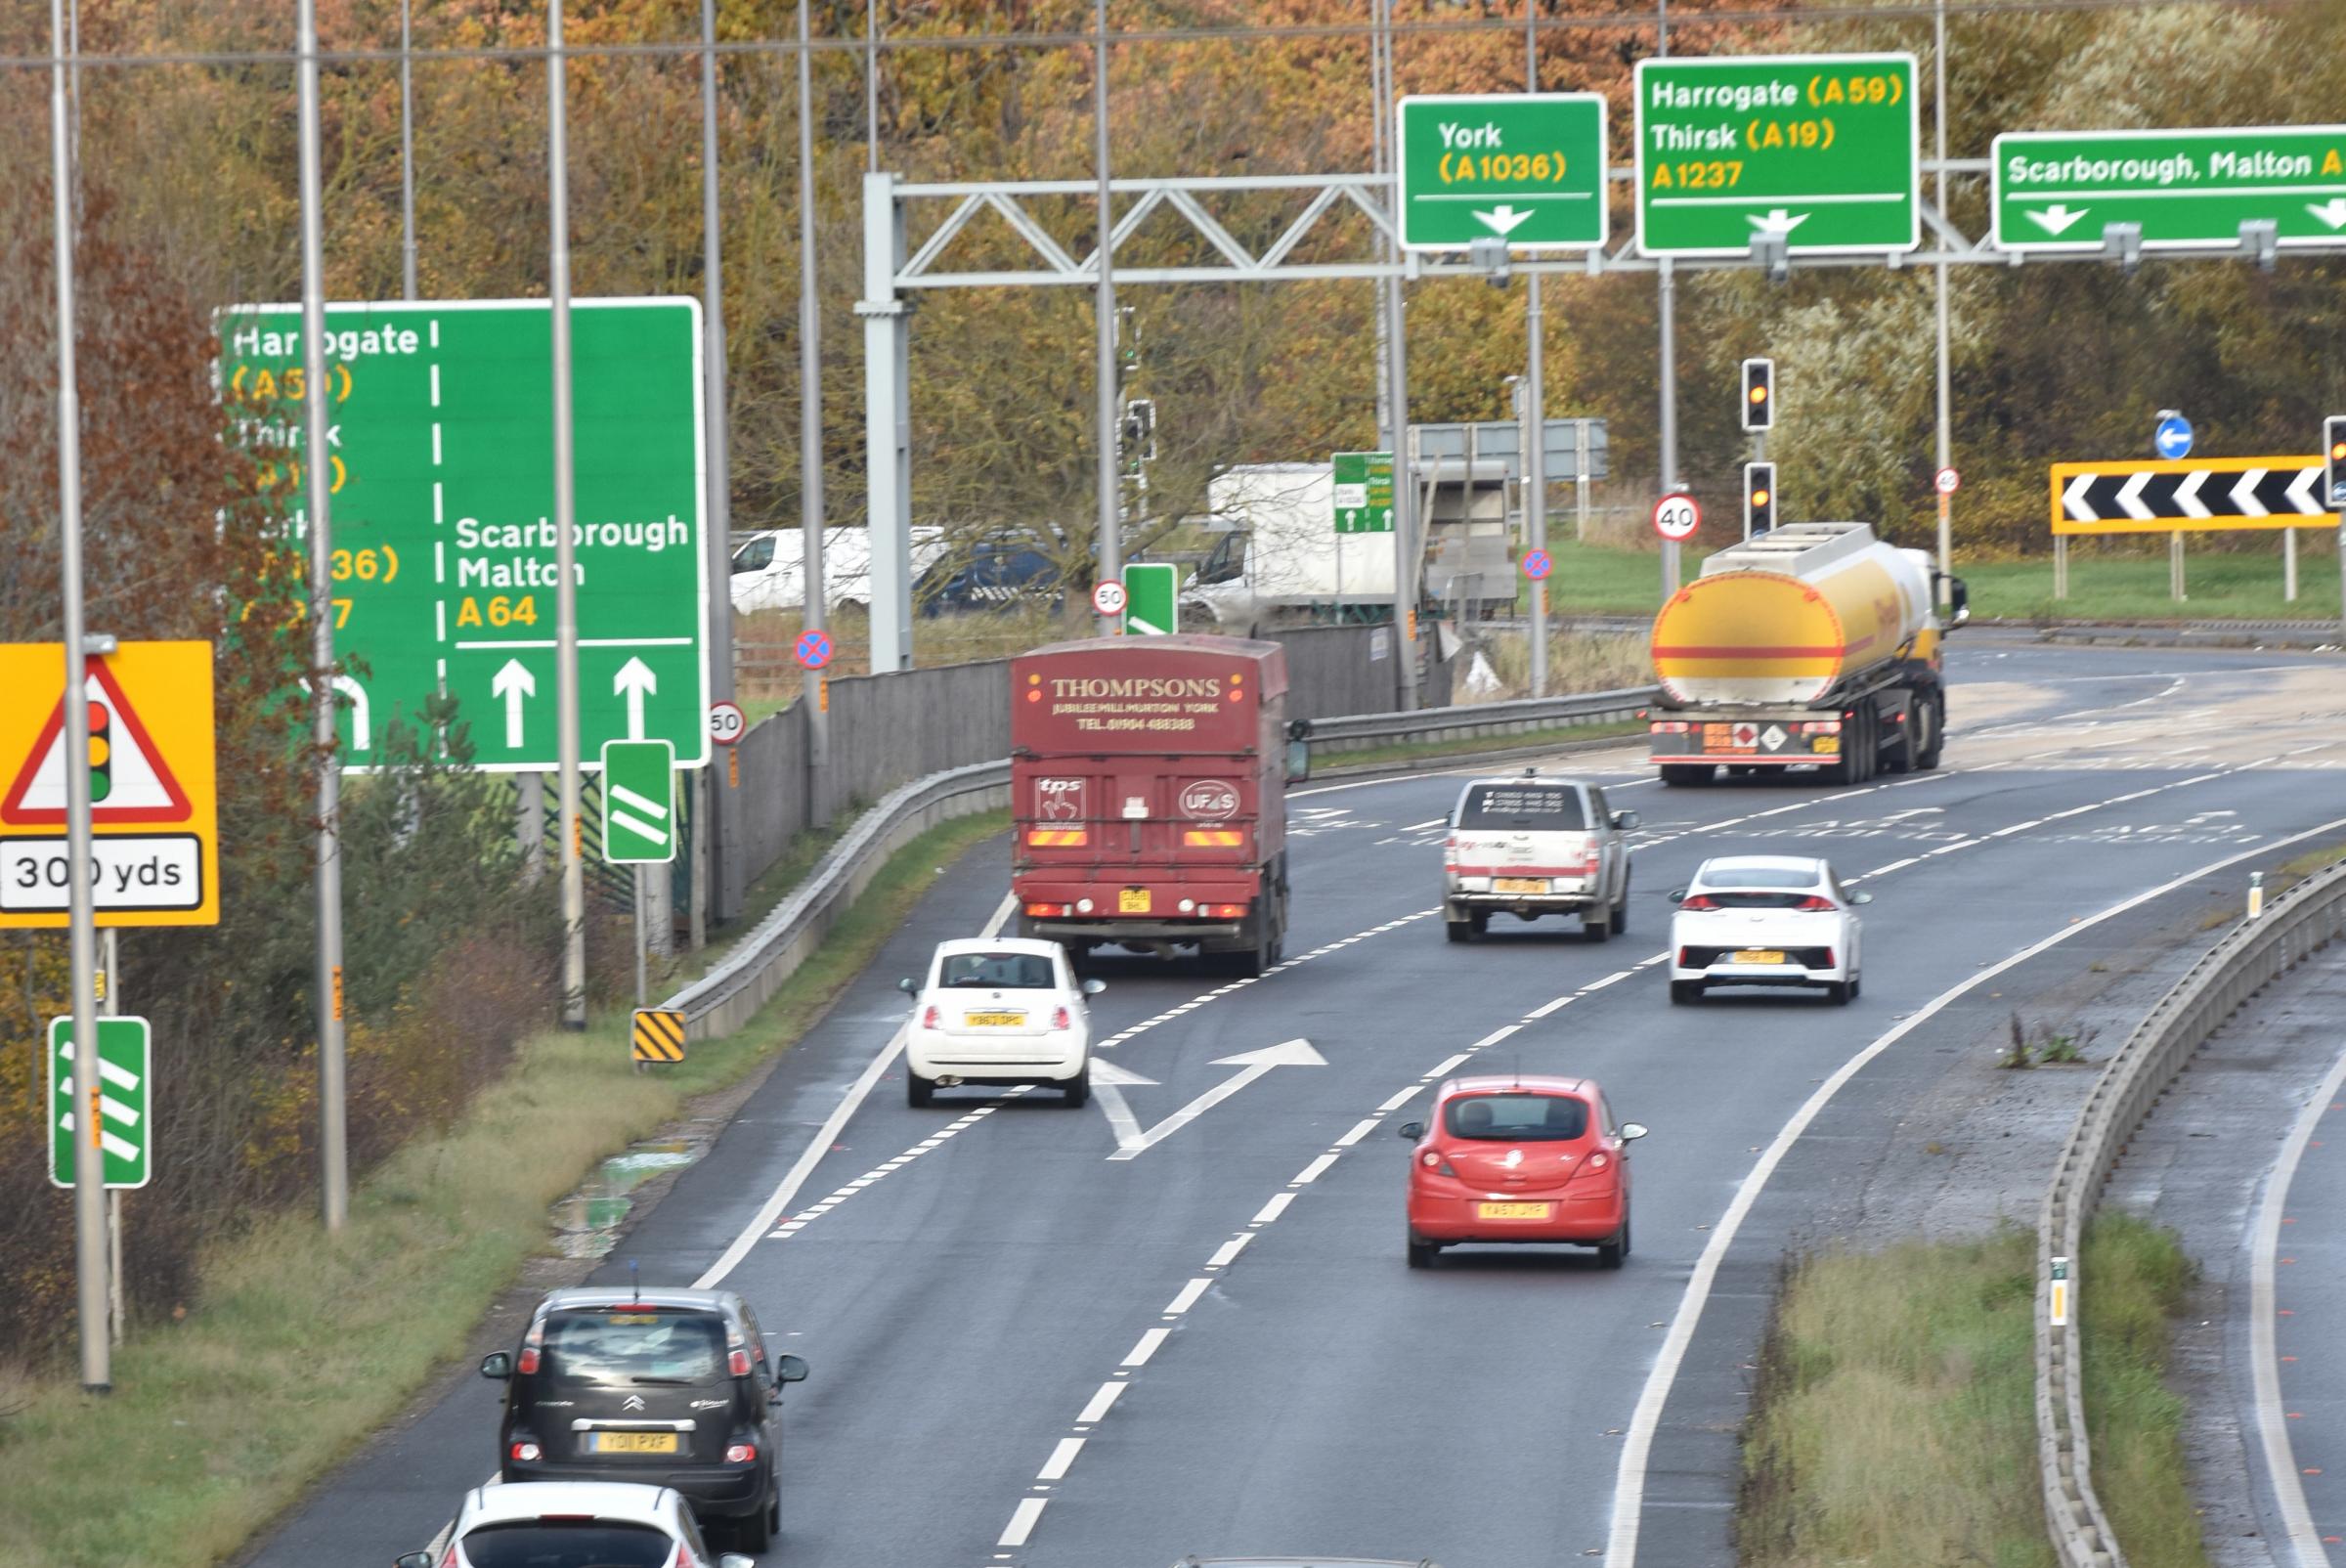 Police reveal routes where safety camera vehicles are being deployed to catch speeders